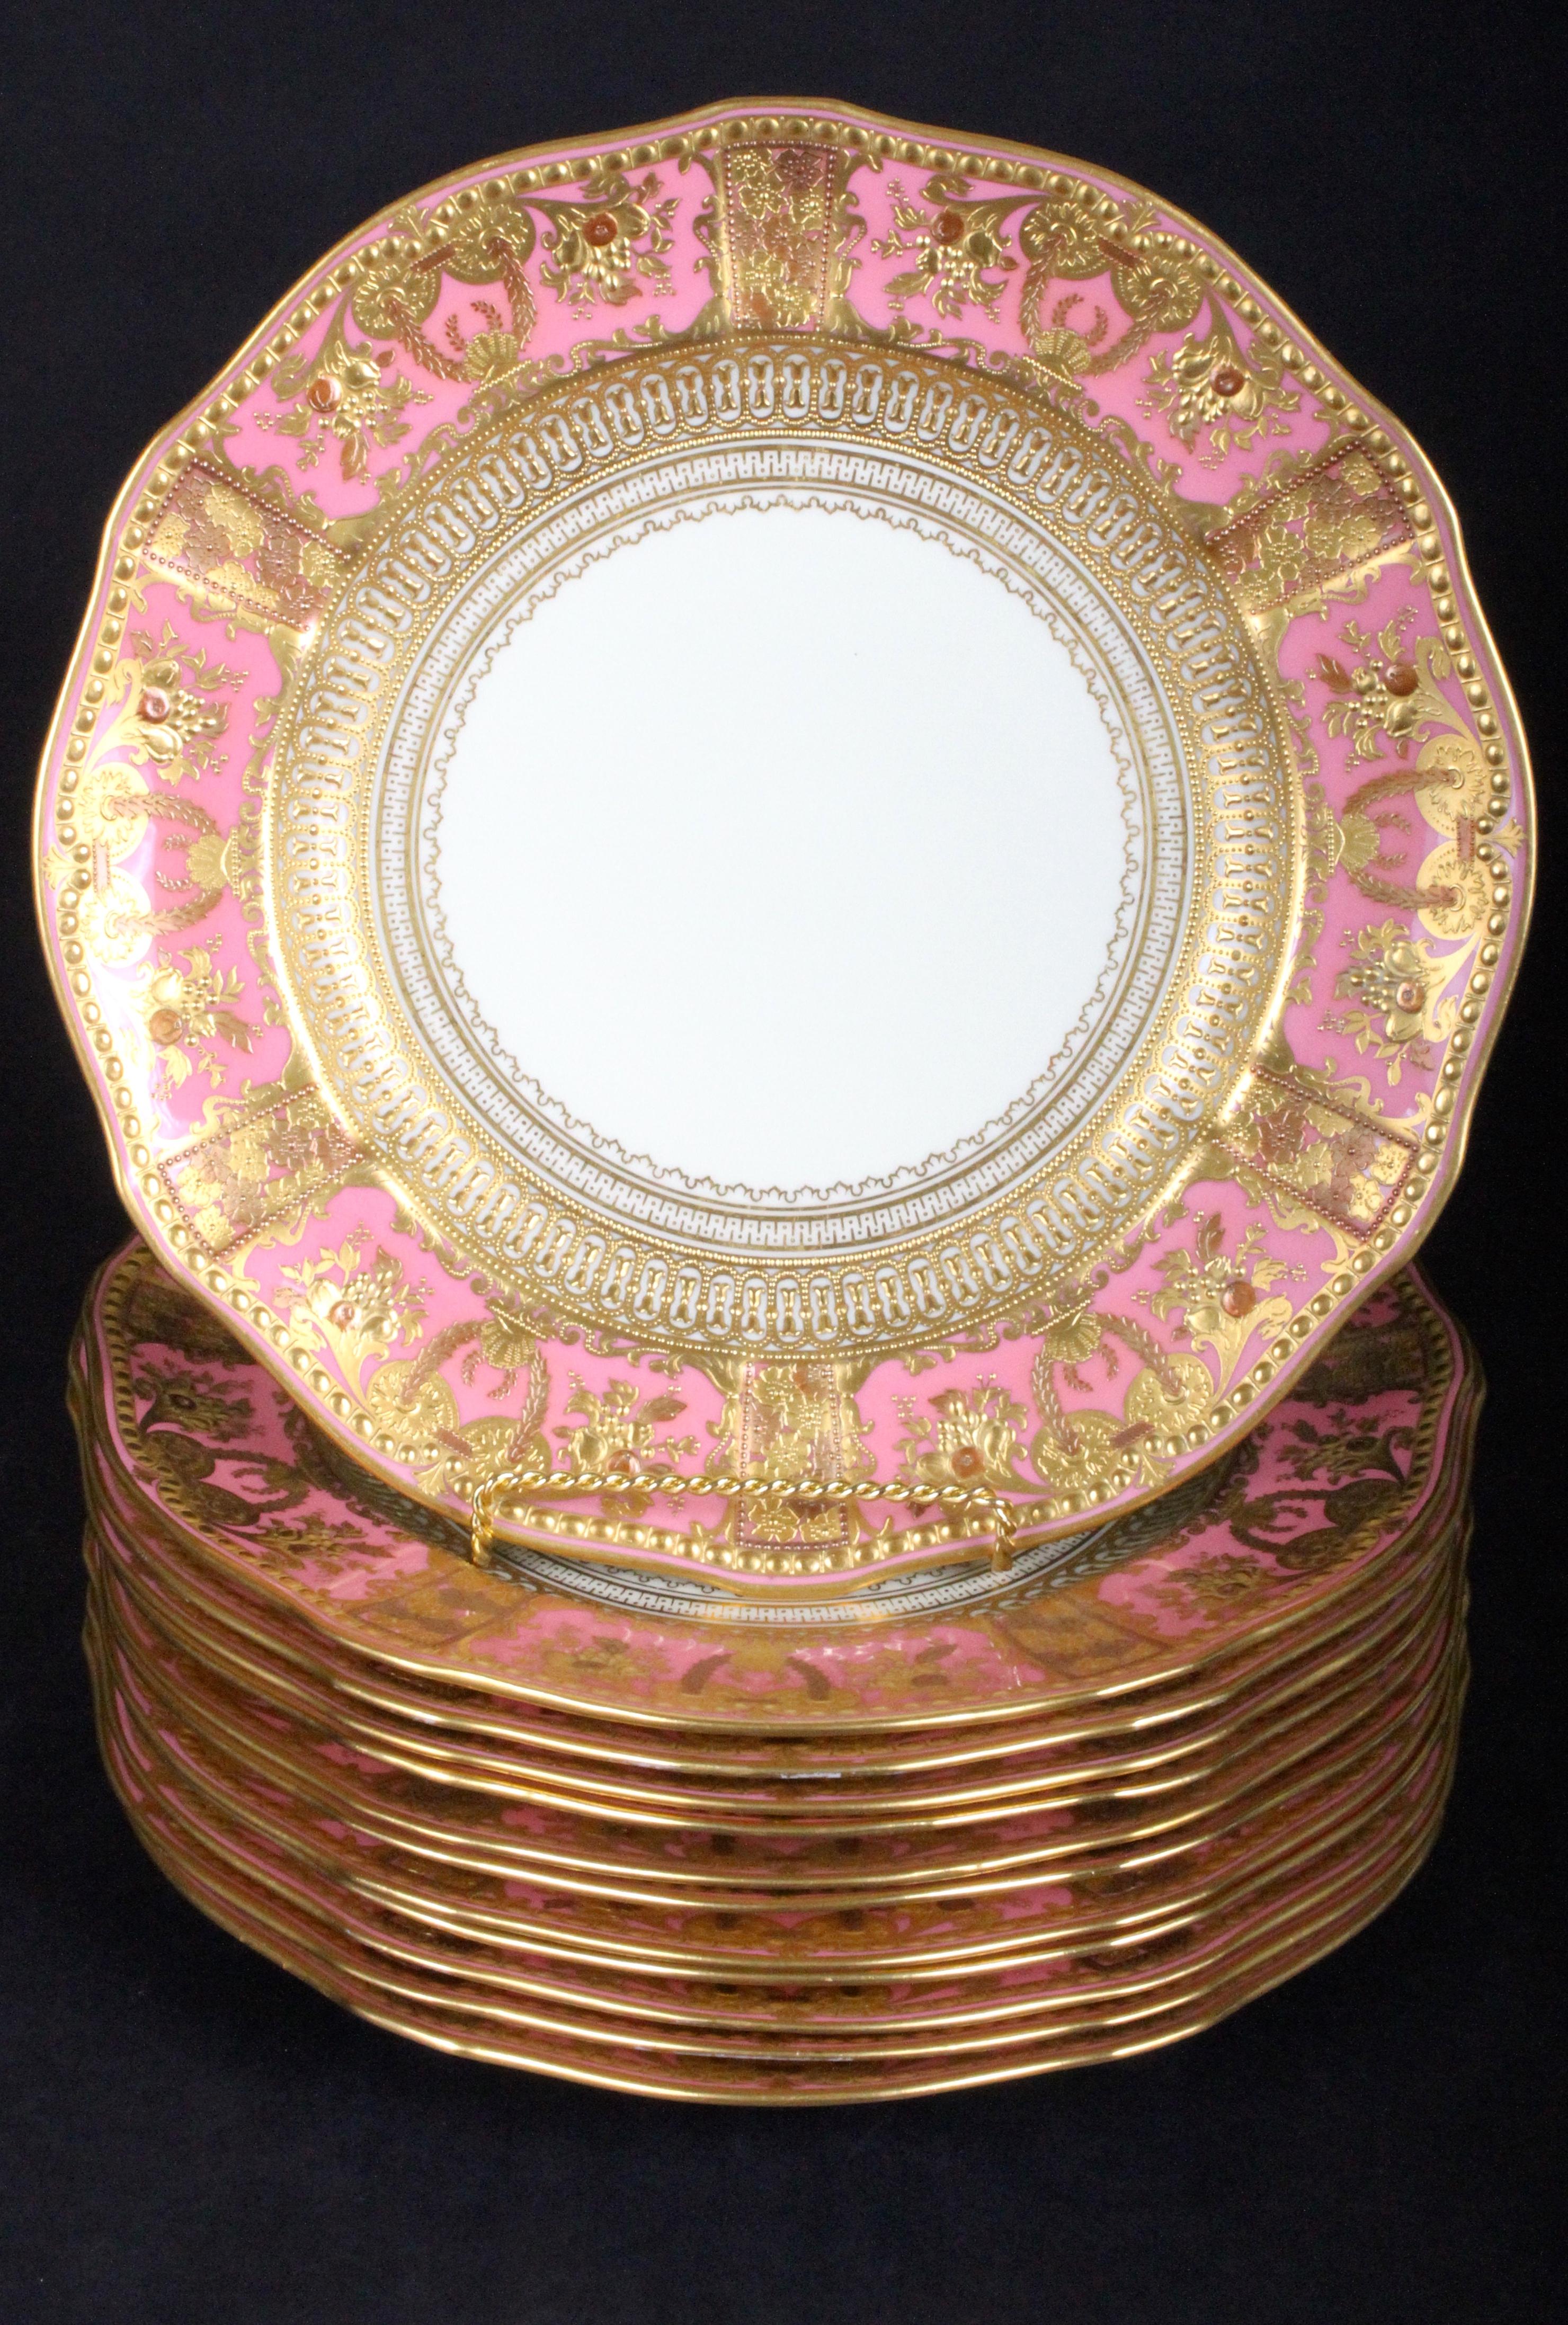 English Service of 19th Century Derby Pink Service Plates with Elaborate 2-Color Gilding